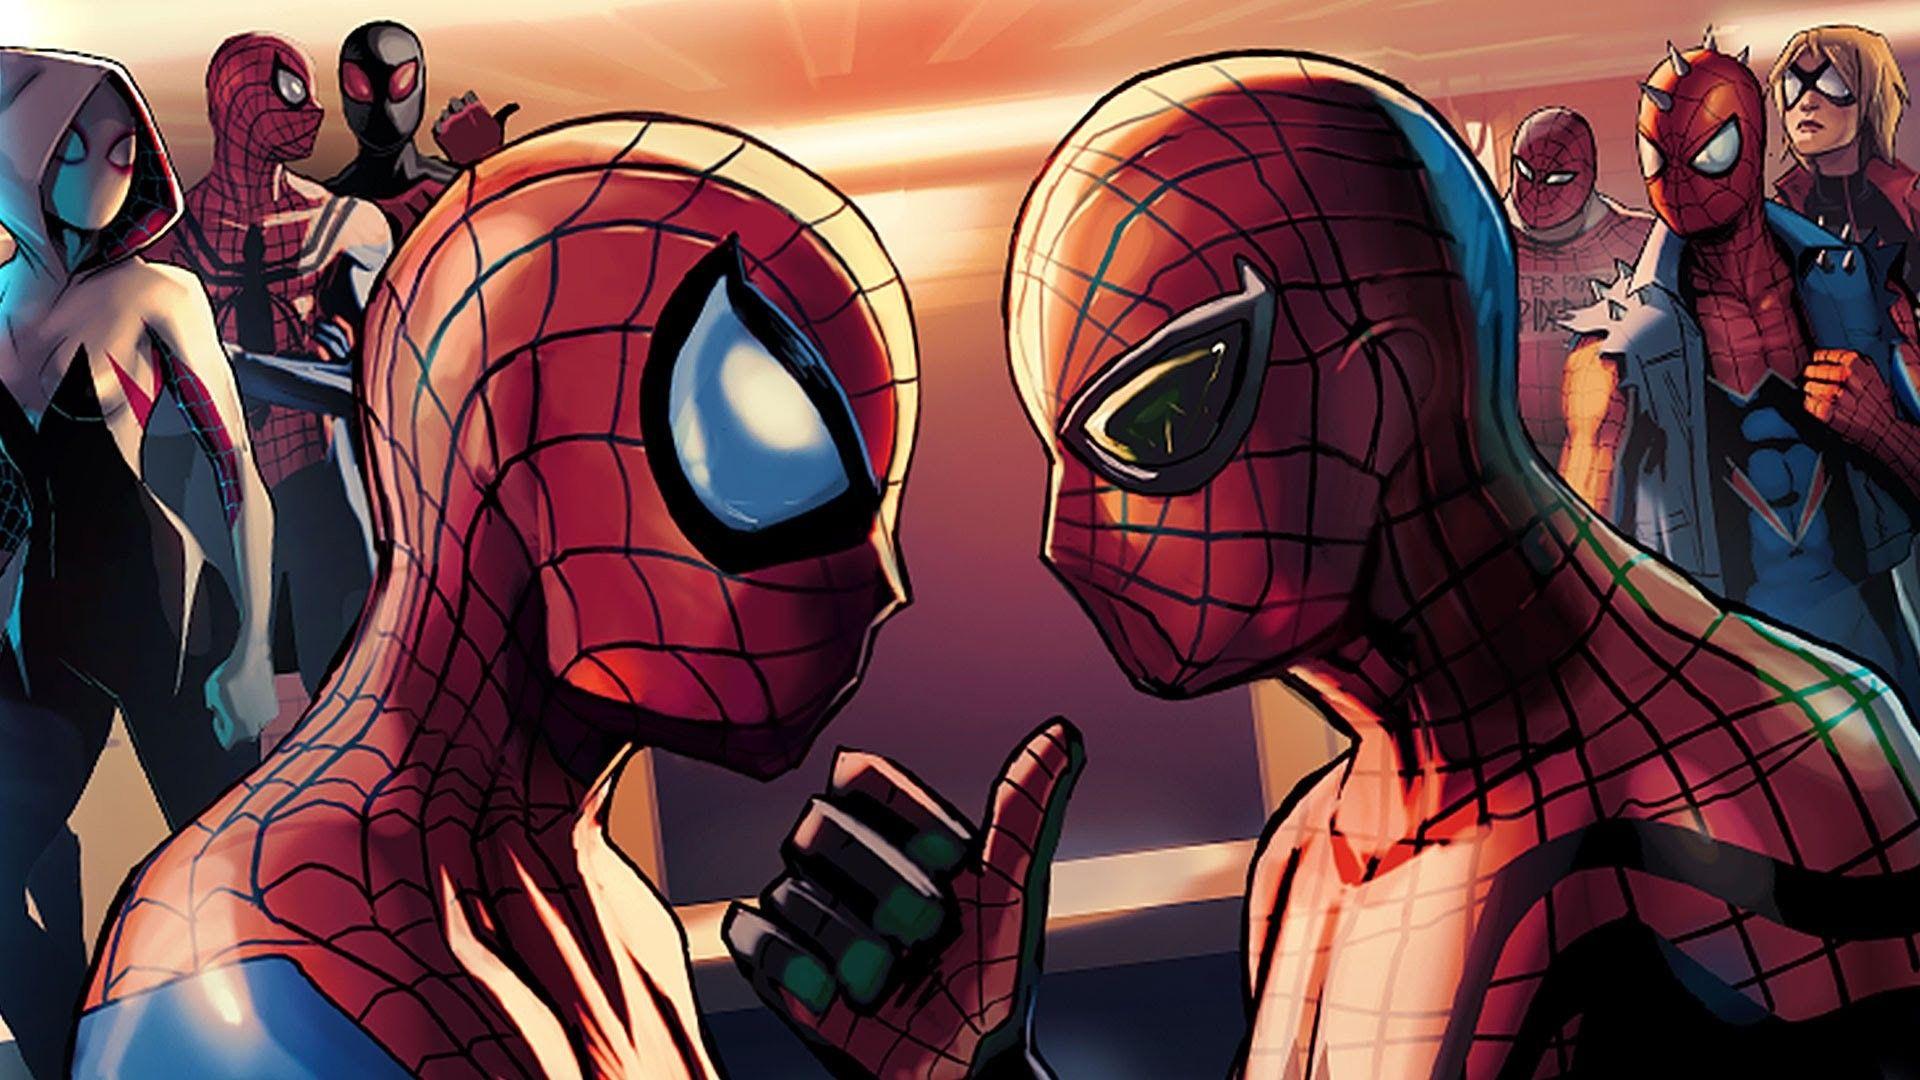 Superior Spiderman Wallpapers HD.